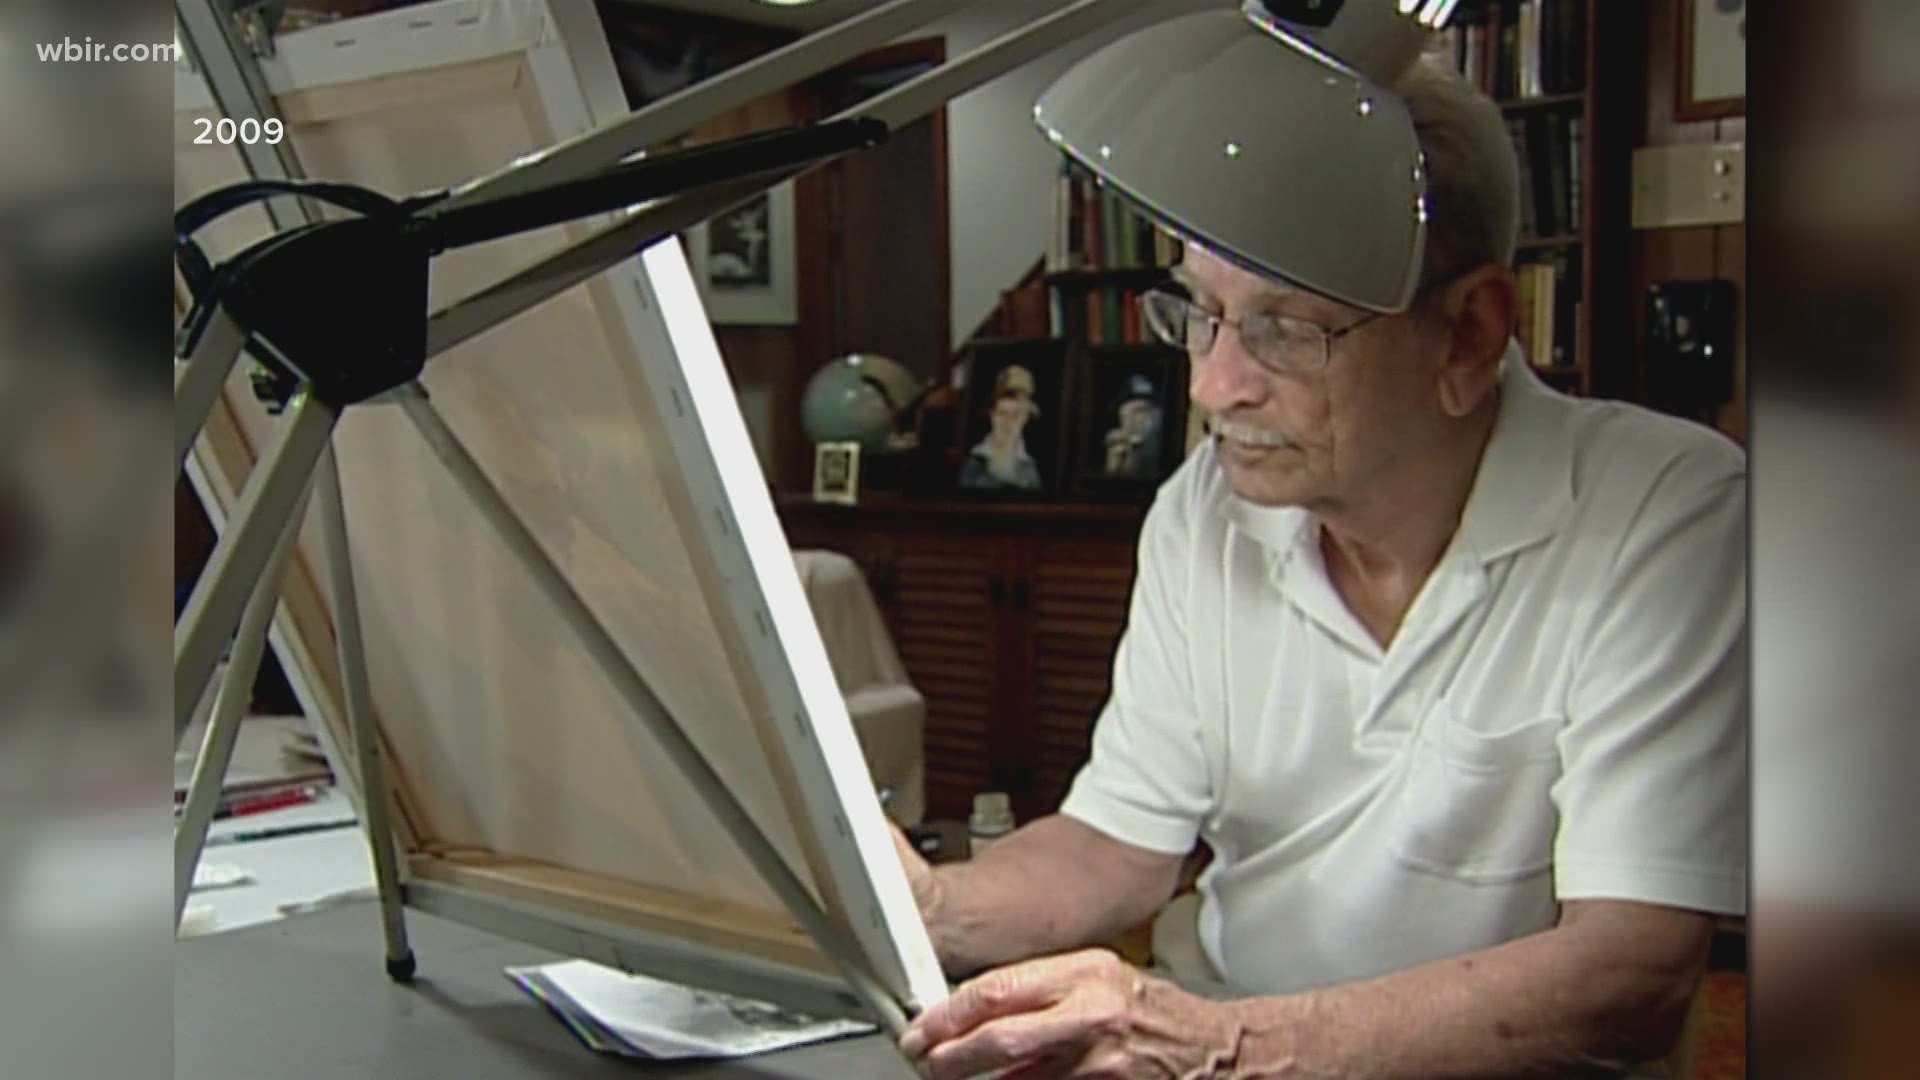 We are in the middle of a war against the coronavirus, but one WWII Navy veteran is using this time to seek peace through his passion of painting.